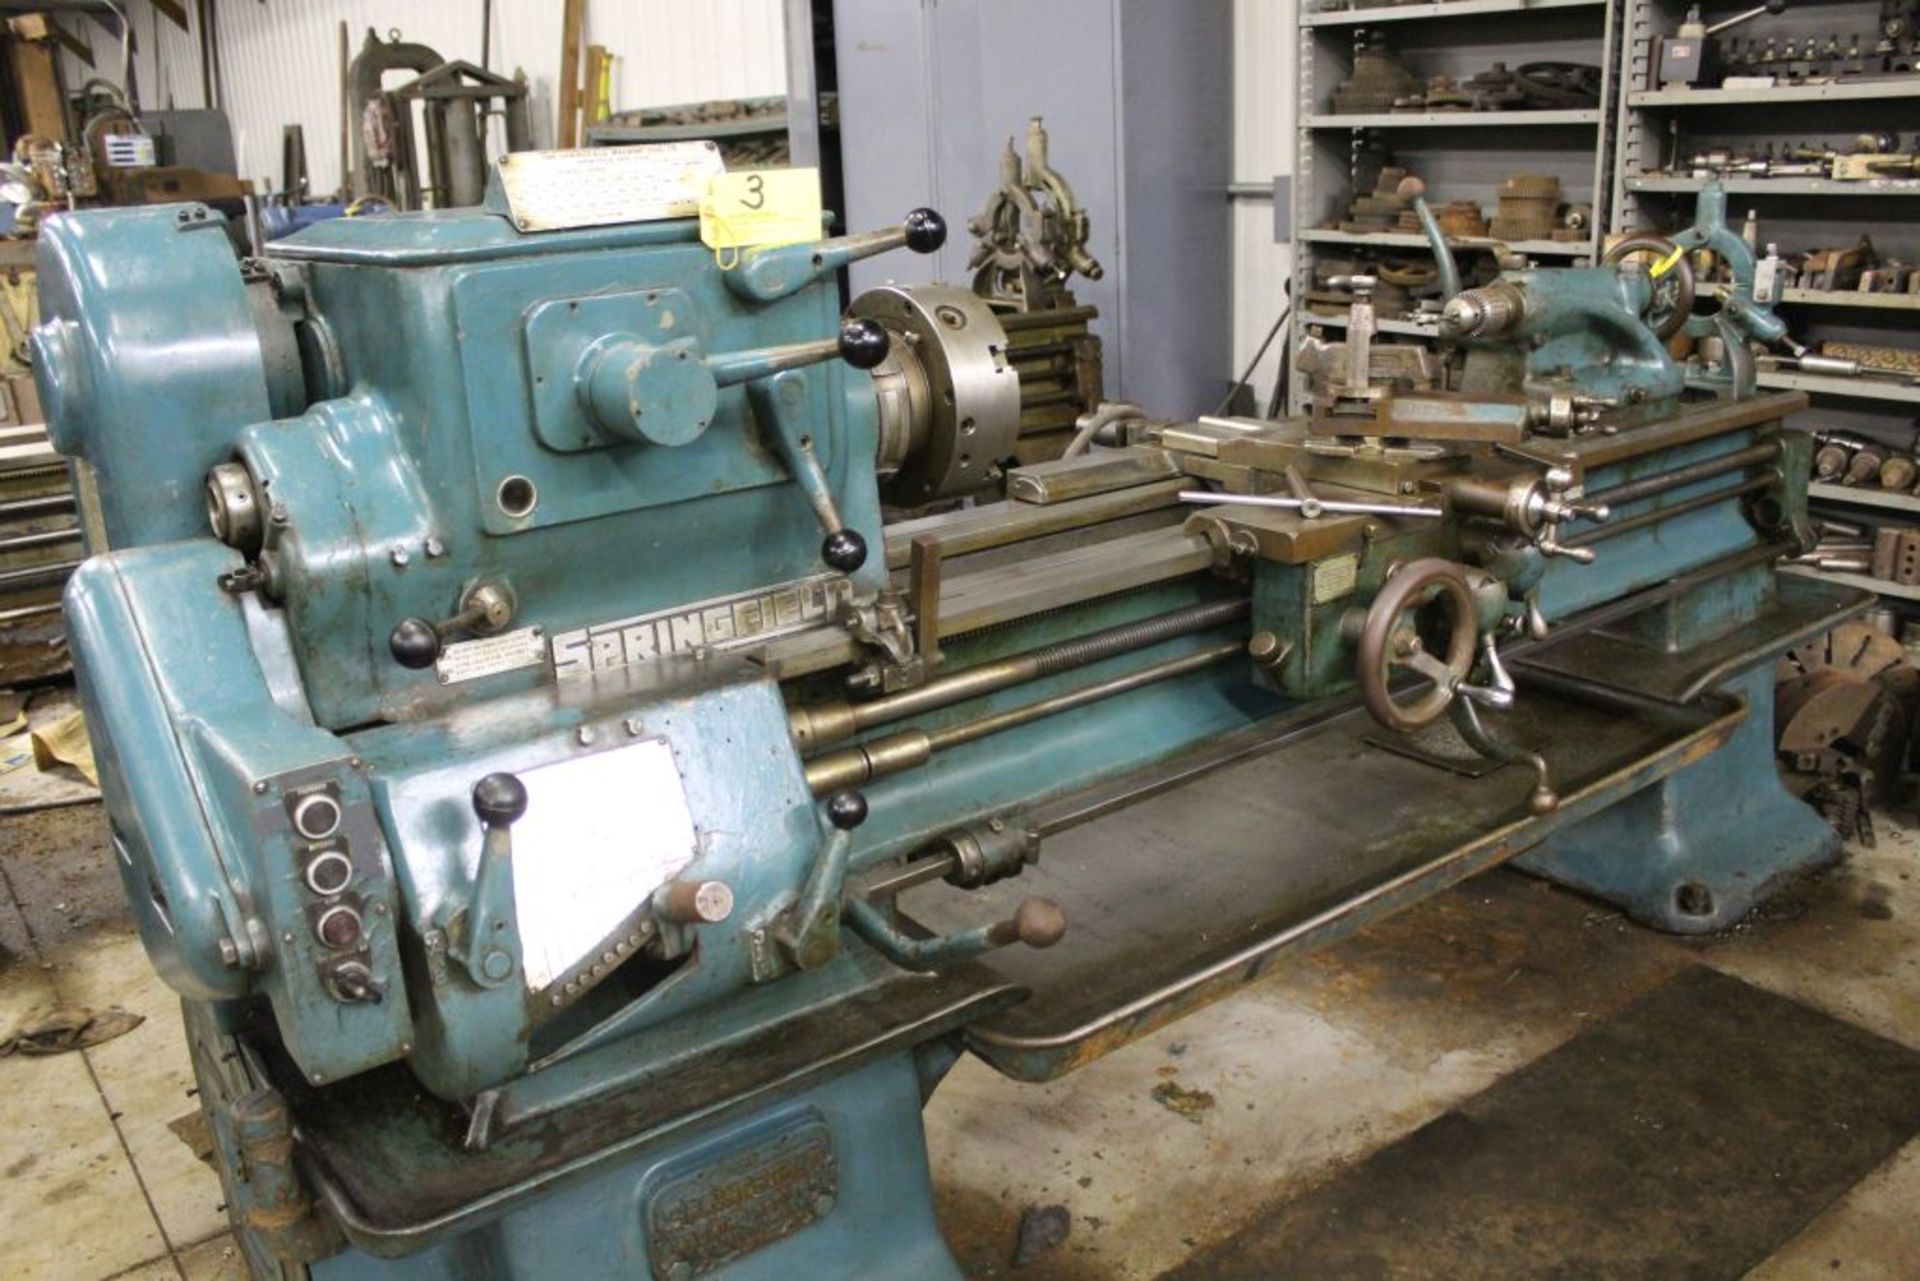 Springfield lathe, sn 52071, 14", 1 3/4" hole, 16" swing, 48" center to center, taper attachment, - Image 2 of 14